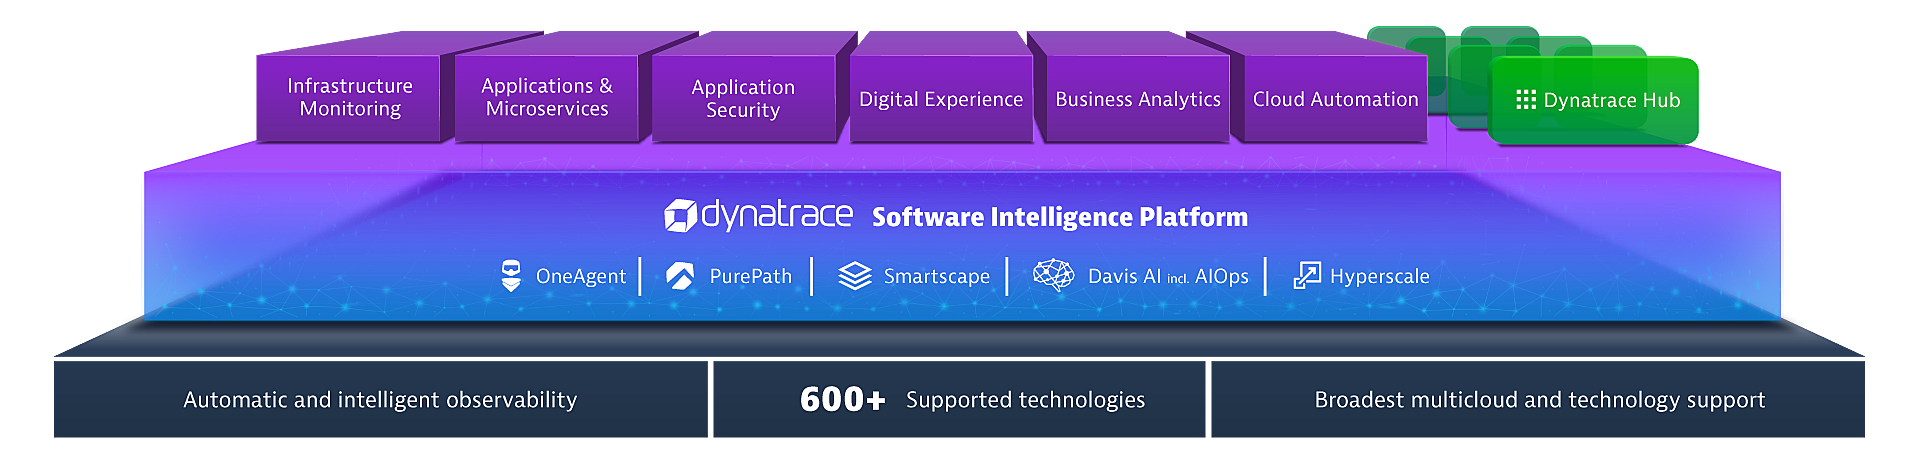 Dynatrace all in one platform 2200 00a4216720